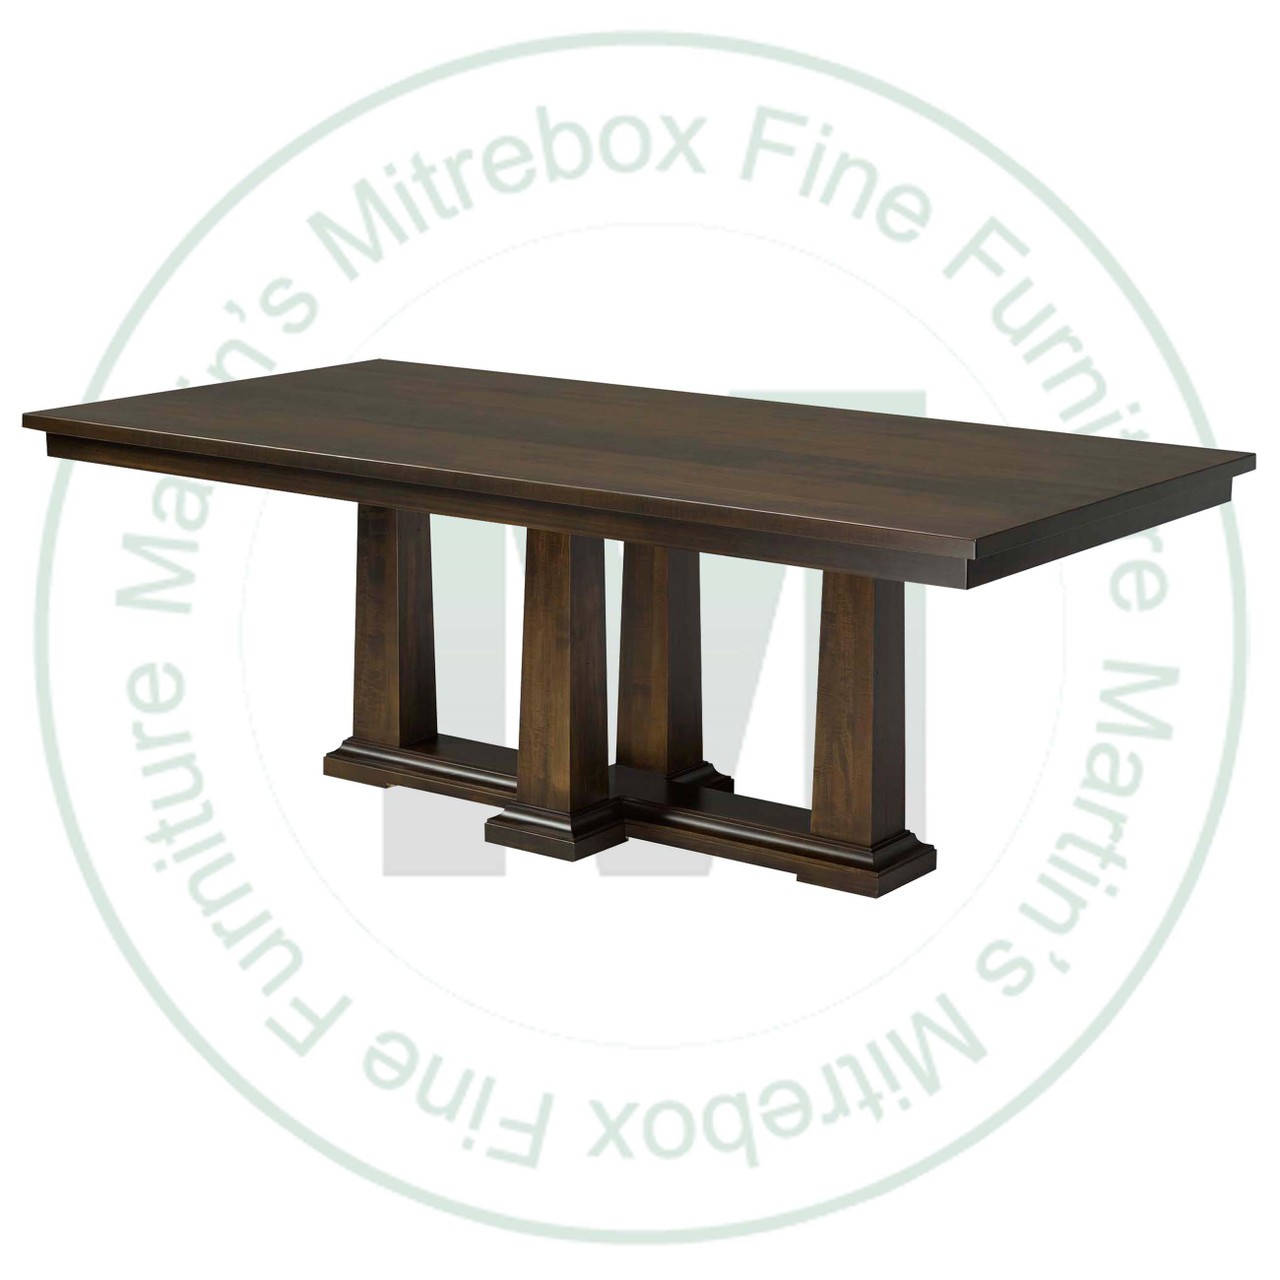 Oak Parthenon Double Pedestal Table 48''D x 120''W x 30''H And 2 - 16'' Extensions Has 1.75'' Thick Top